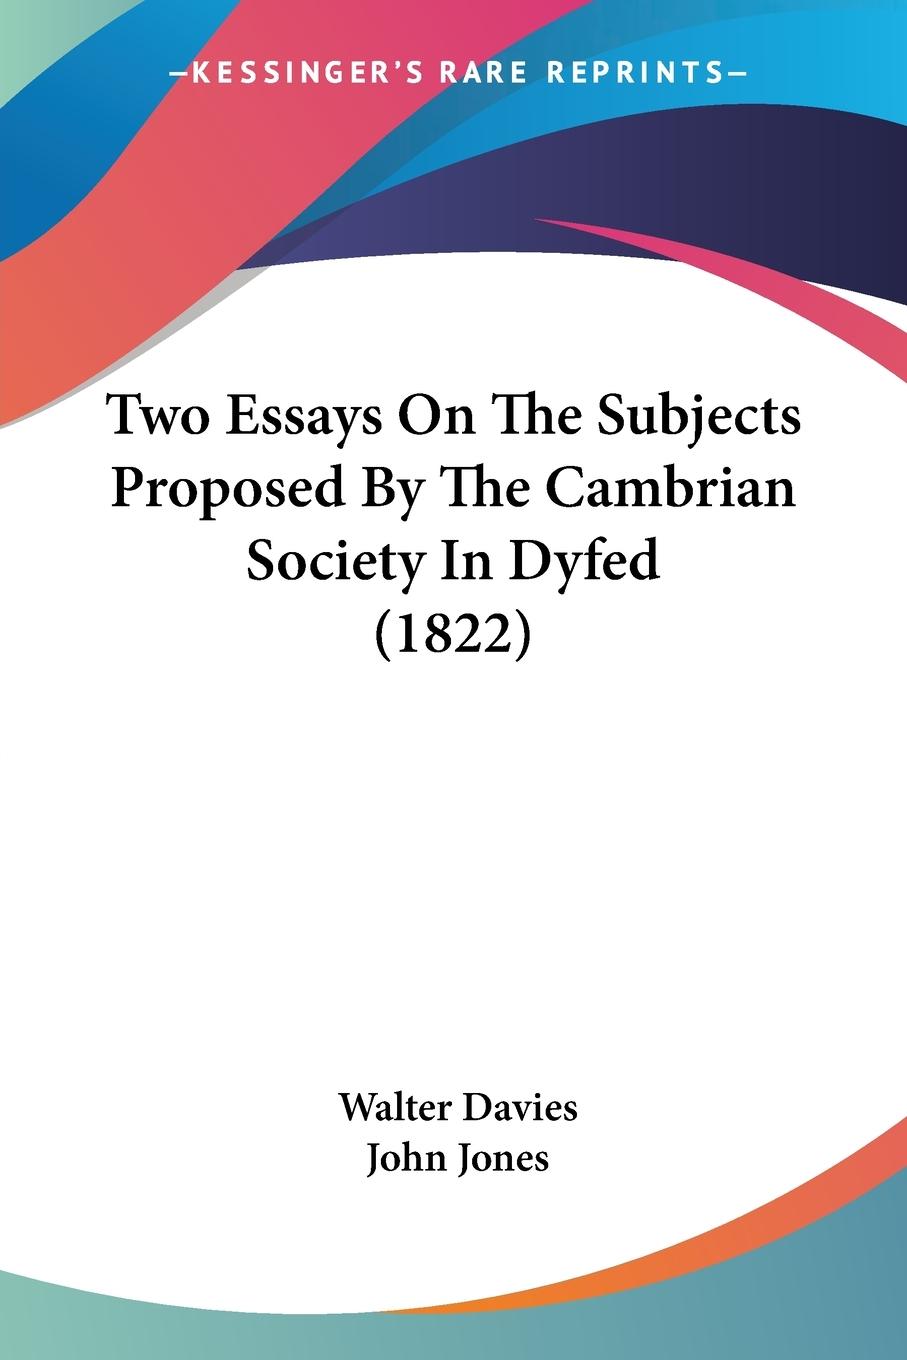 Two Essays On The Subjects Proposed By The Cambrian Society In Dyfed (1822) - Davies, Walter Jones, John